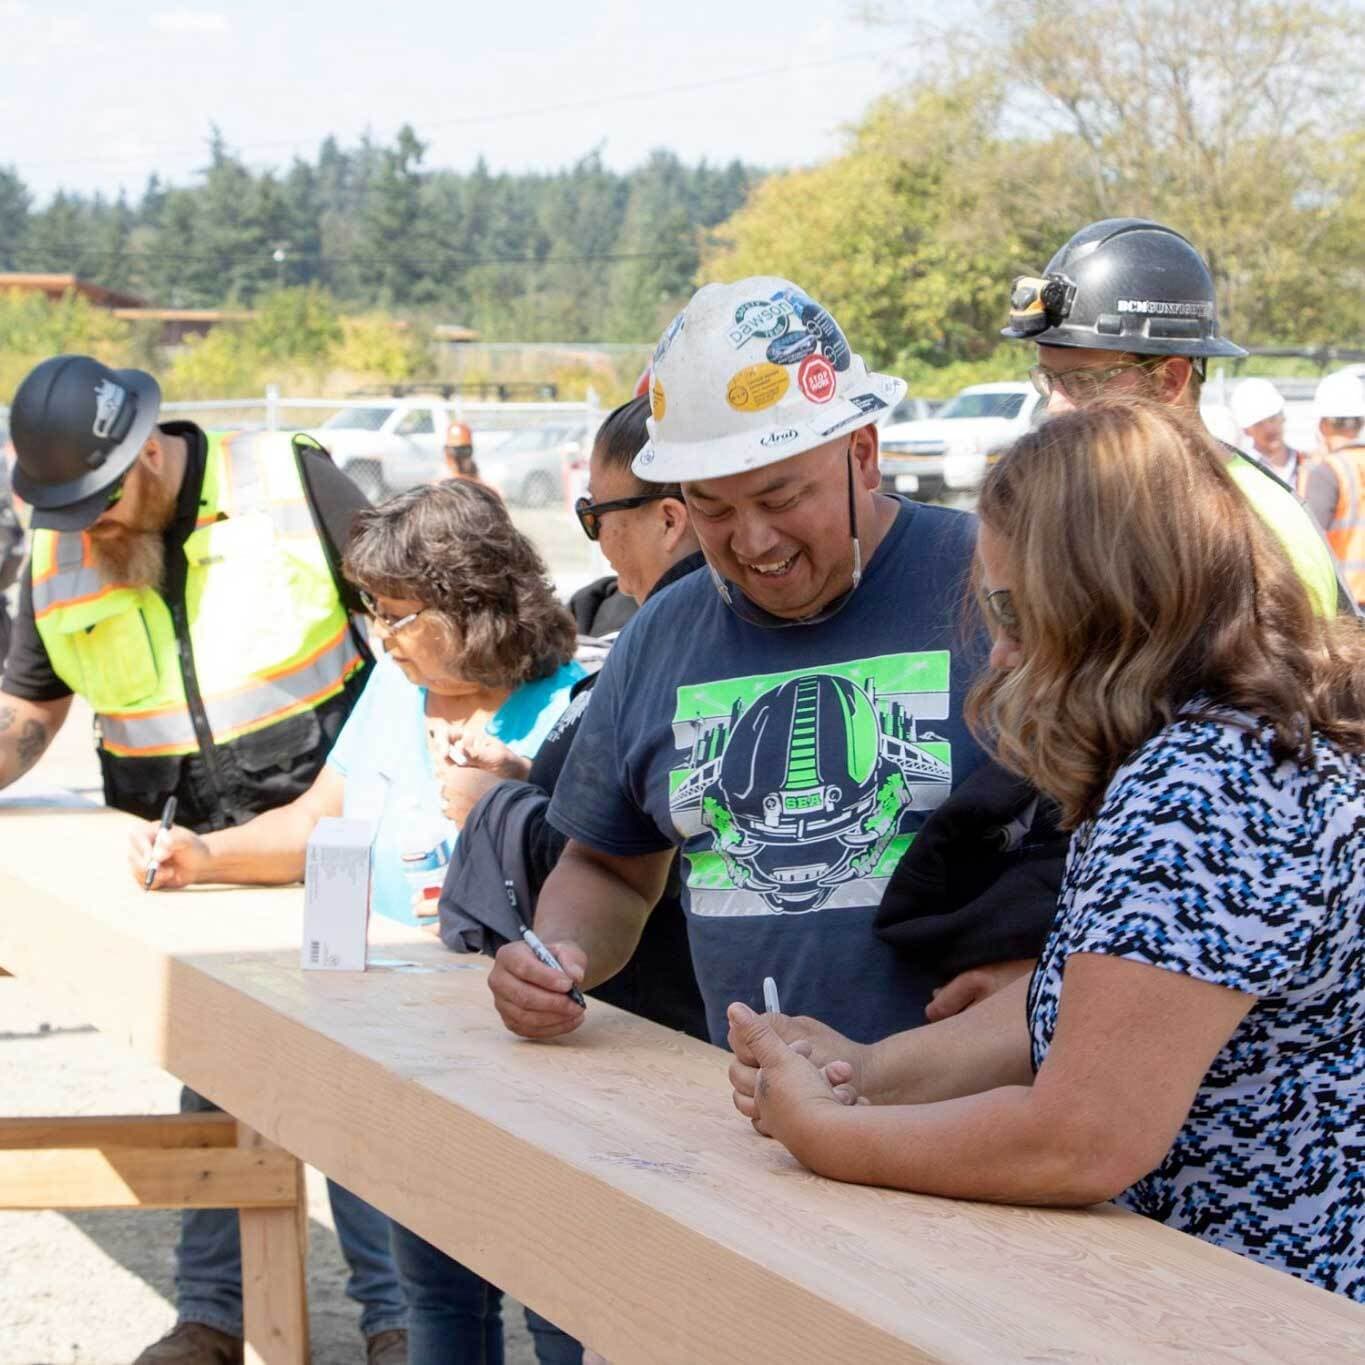 Employees signing a wooden beam at a construction site.